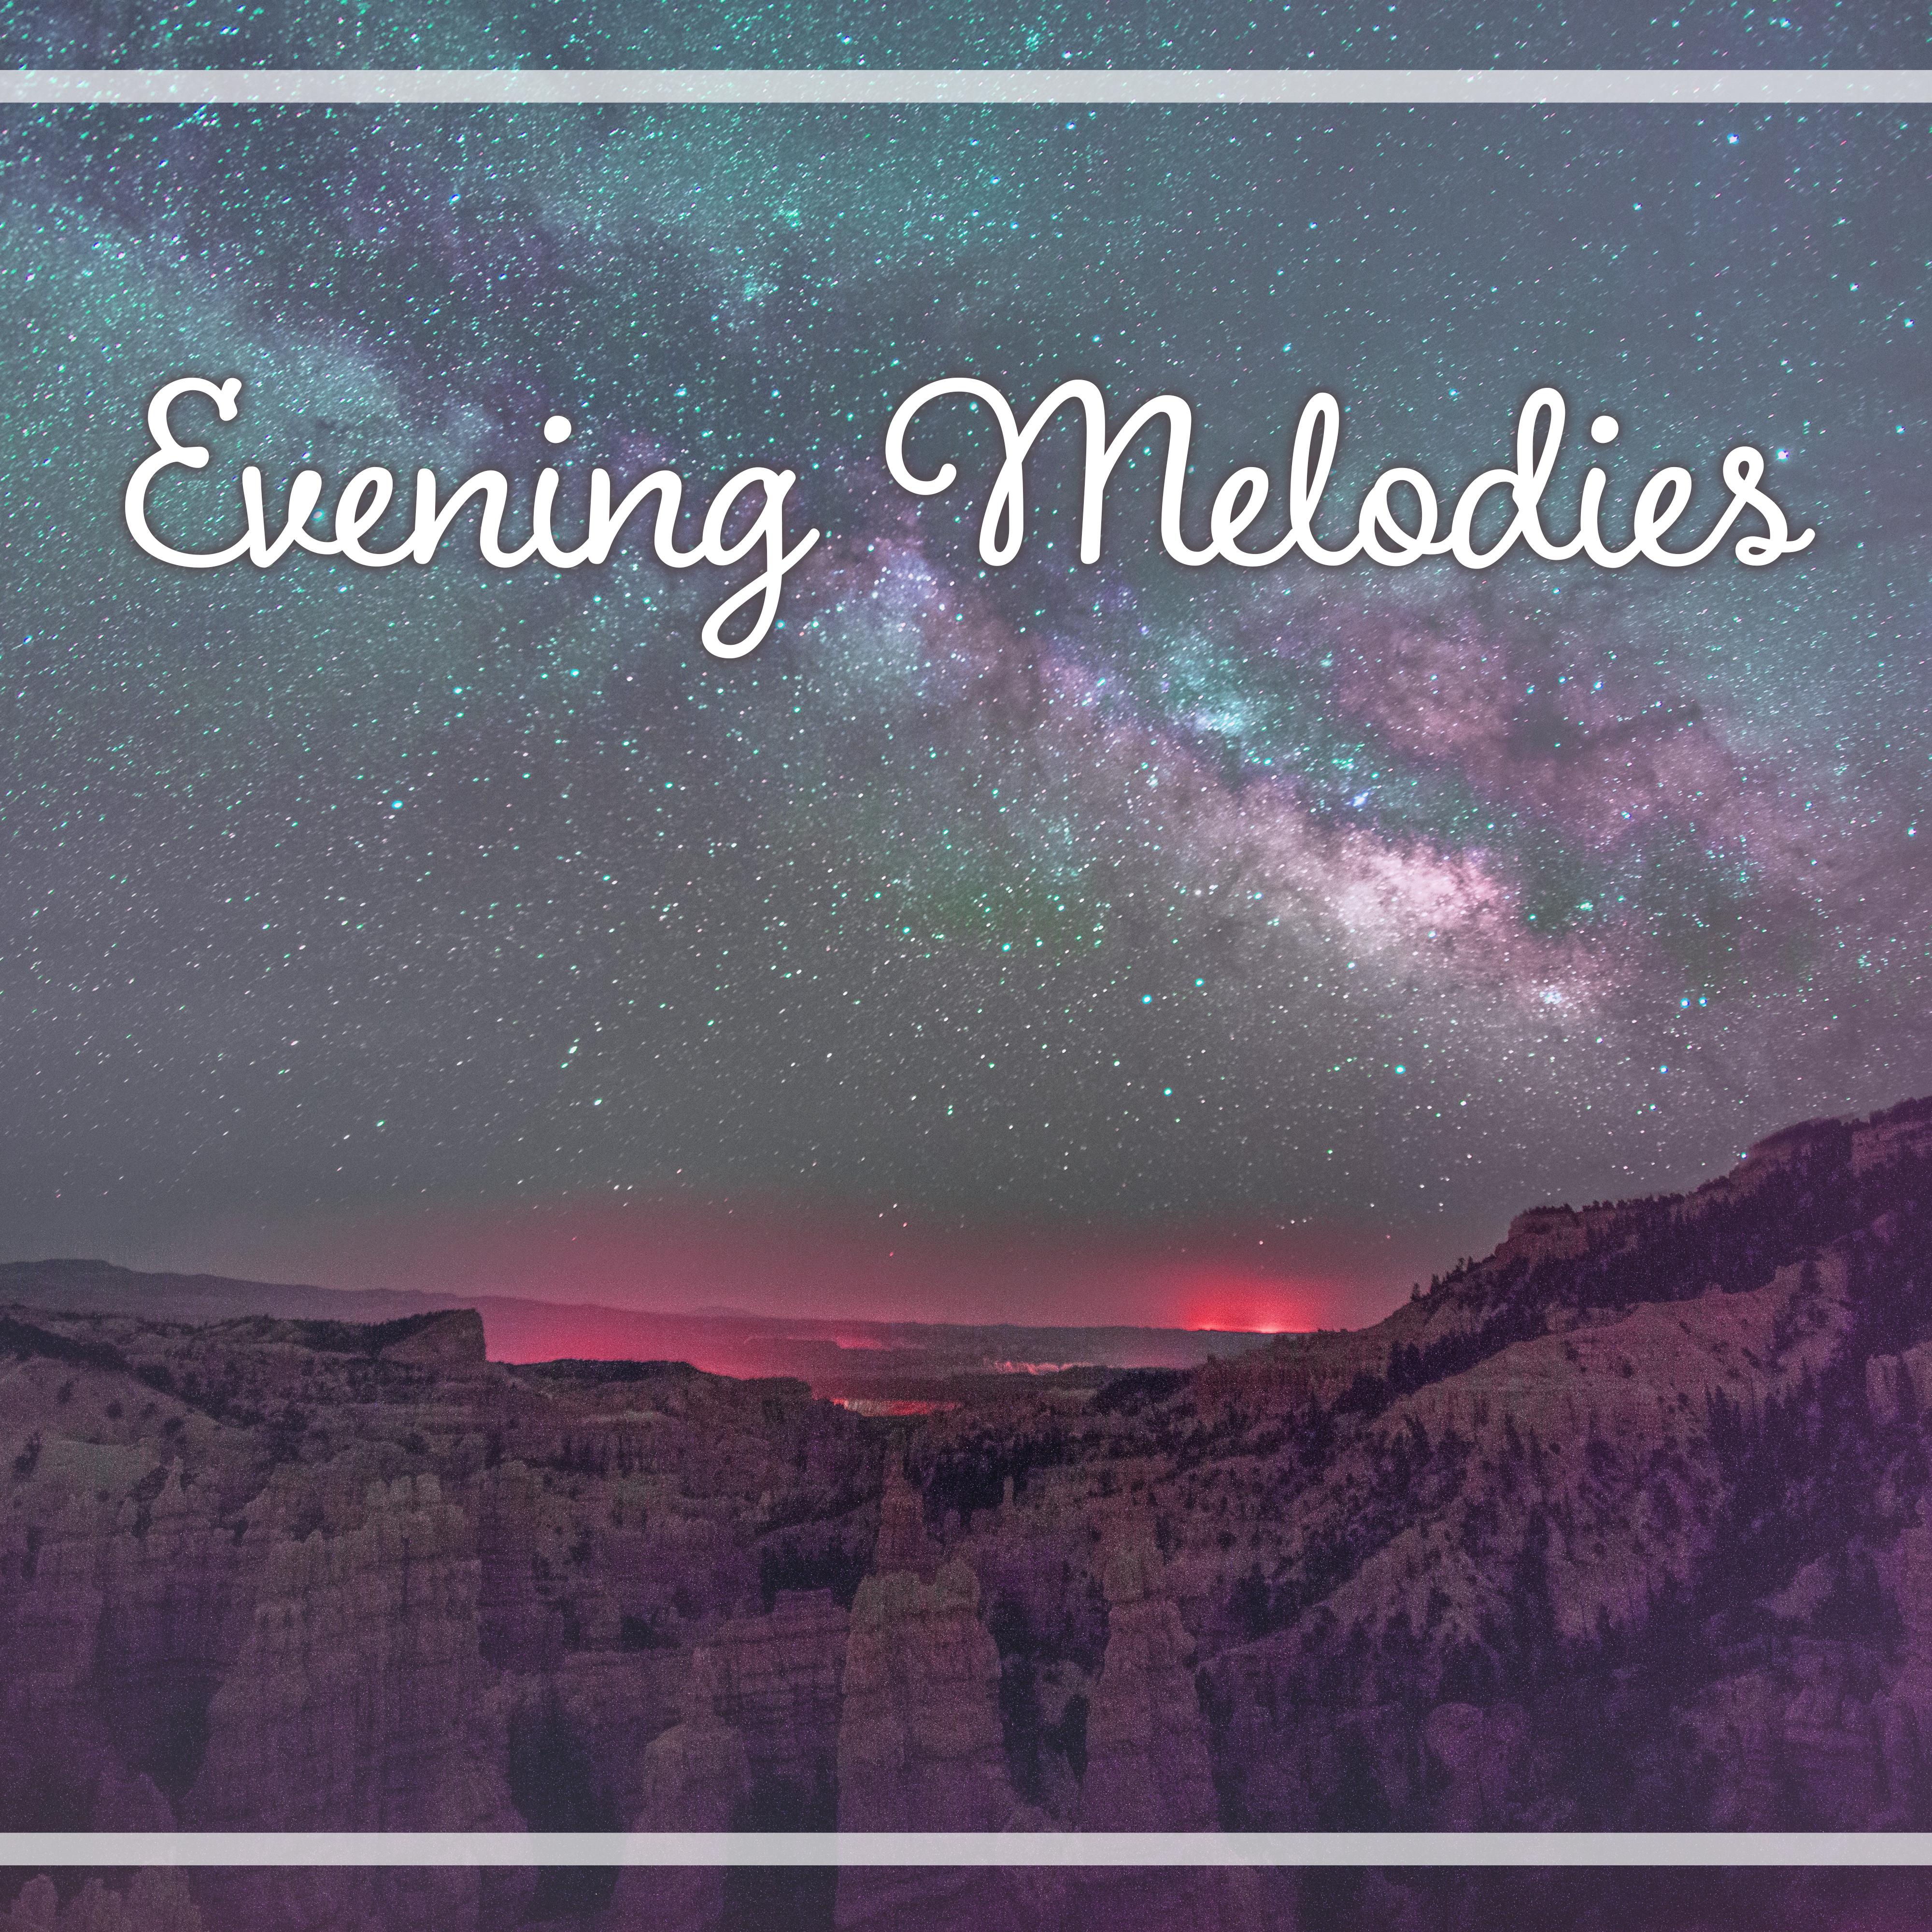 Evening Melodies – Sounds for Sleep, Blissful Sleep, Relaxation Music to Bed, Peaceful Mind, Restful Lullabies, Pillow Music